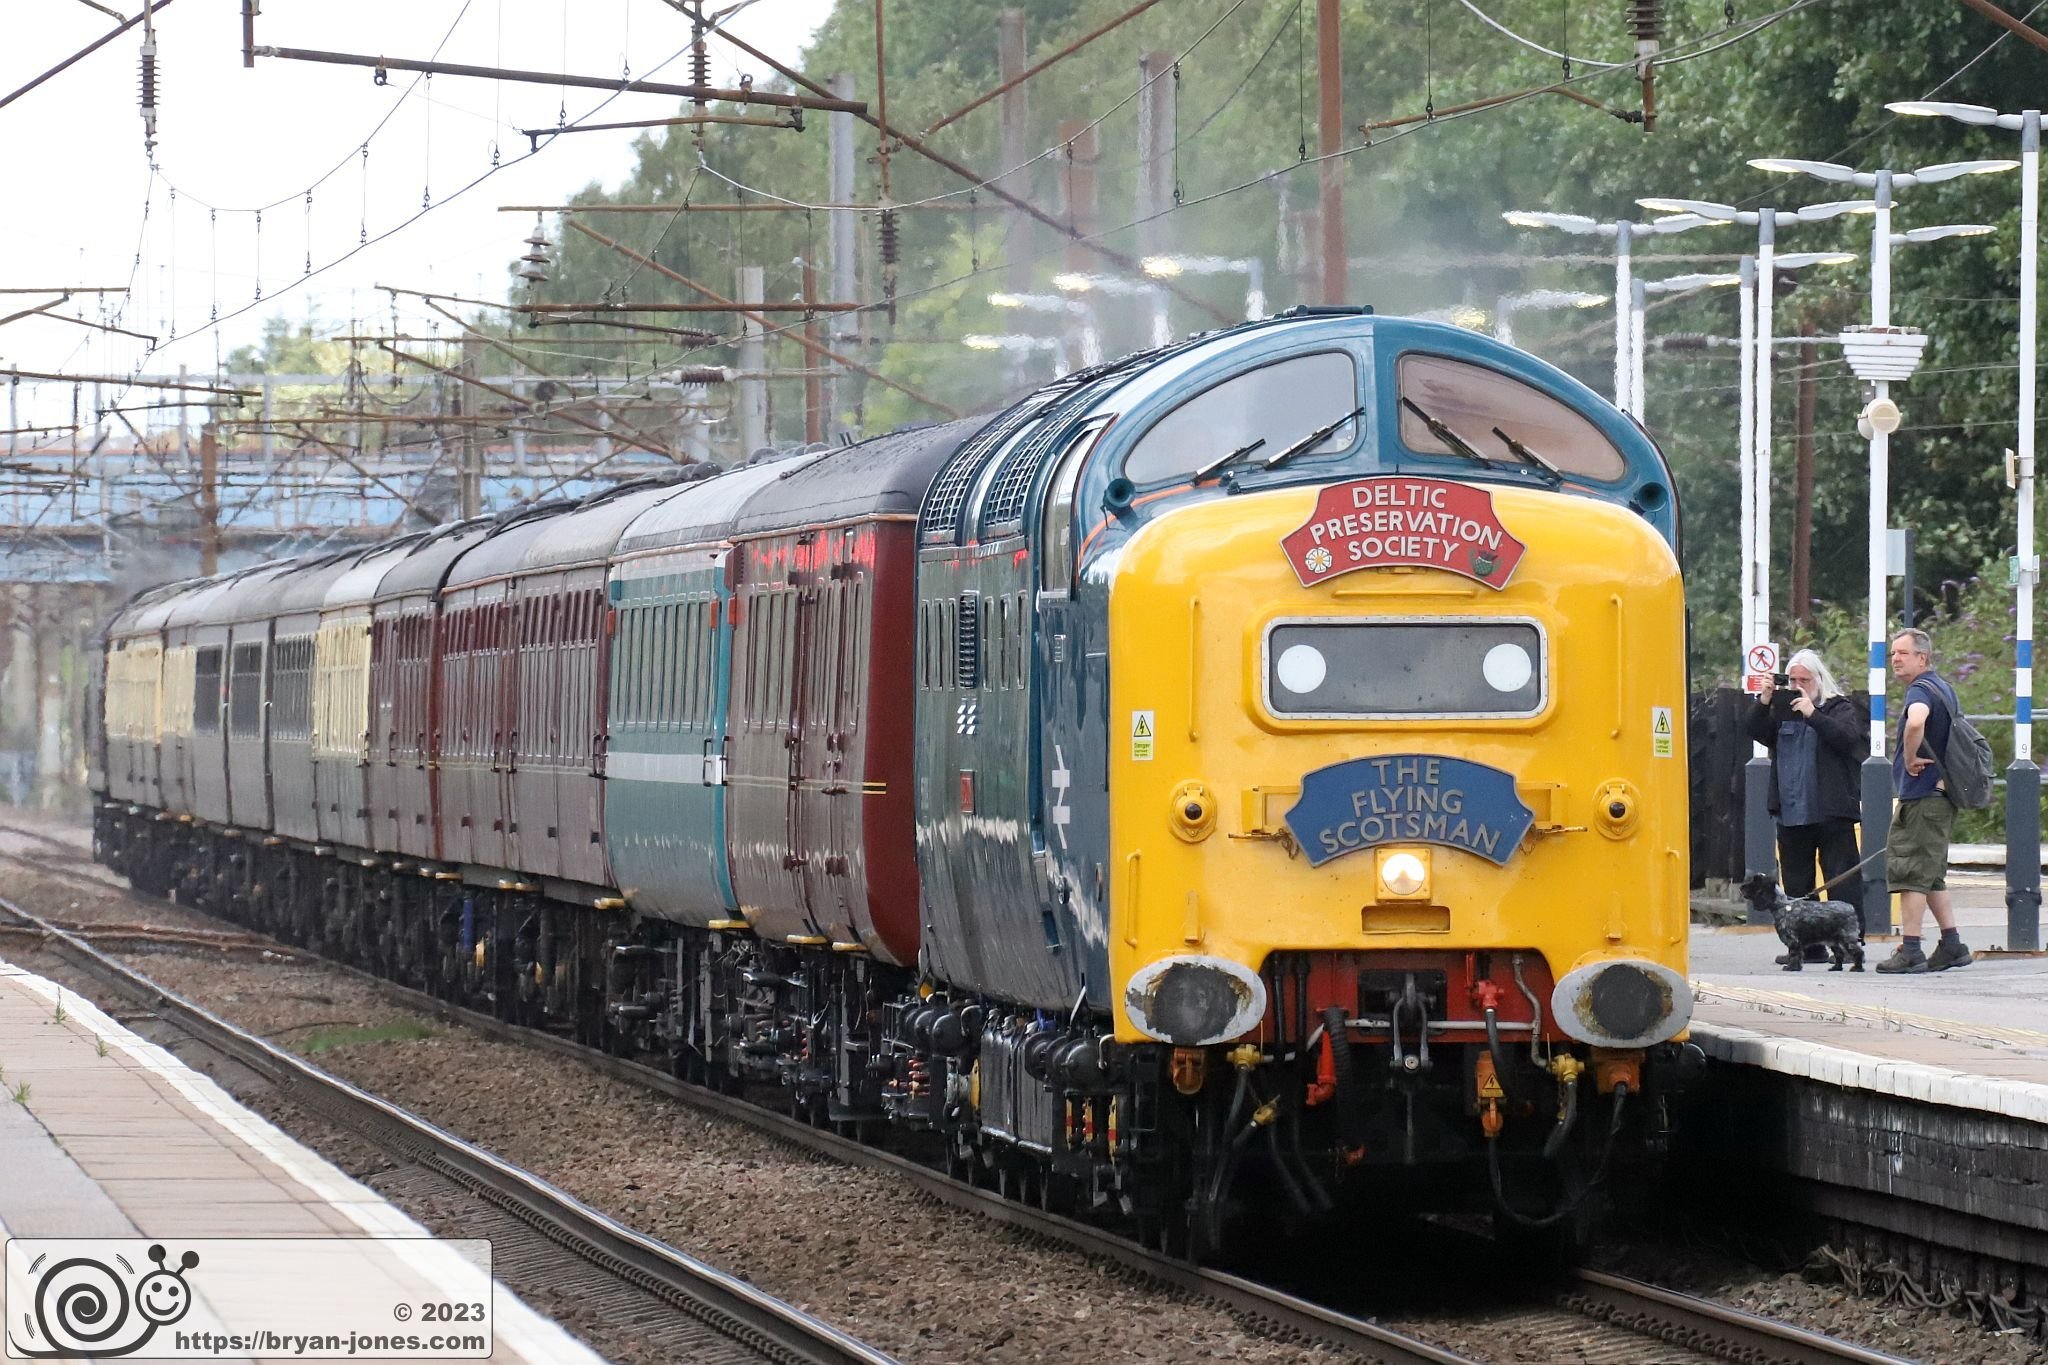 Preserved British Rail Class 55 Deltic 55009 "Alycidon" coasts through Finsbury Park's platform four as it slows for the final stop at London King's Cross. It had come from Willington for the Deltic Preservation Society. 29-Jul-2023.